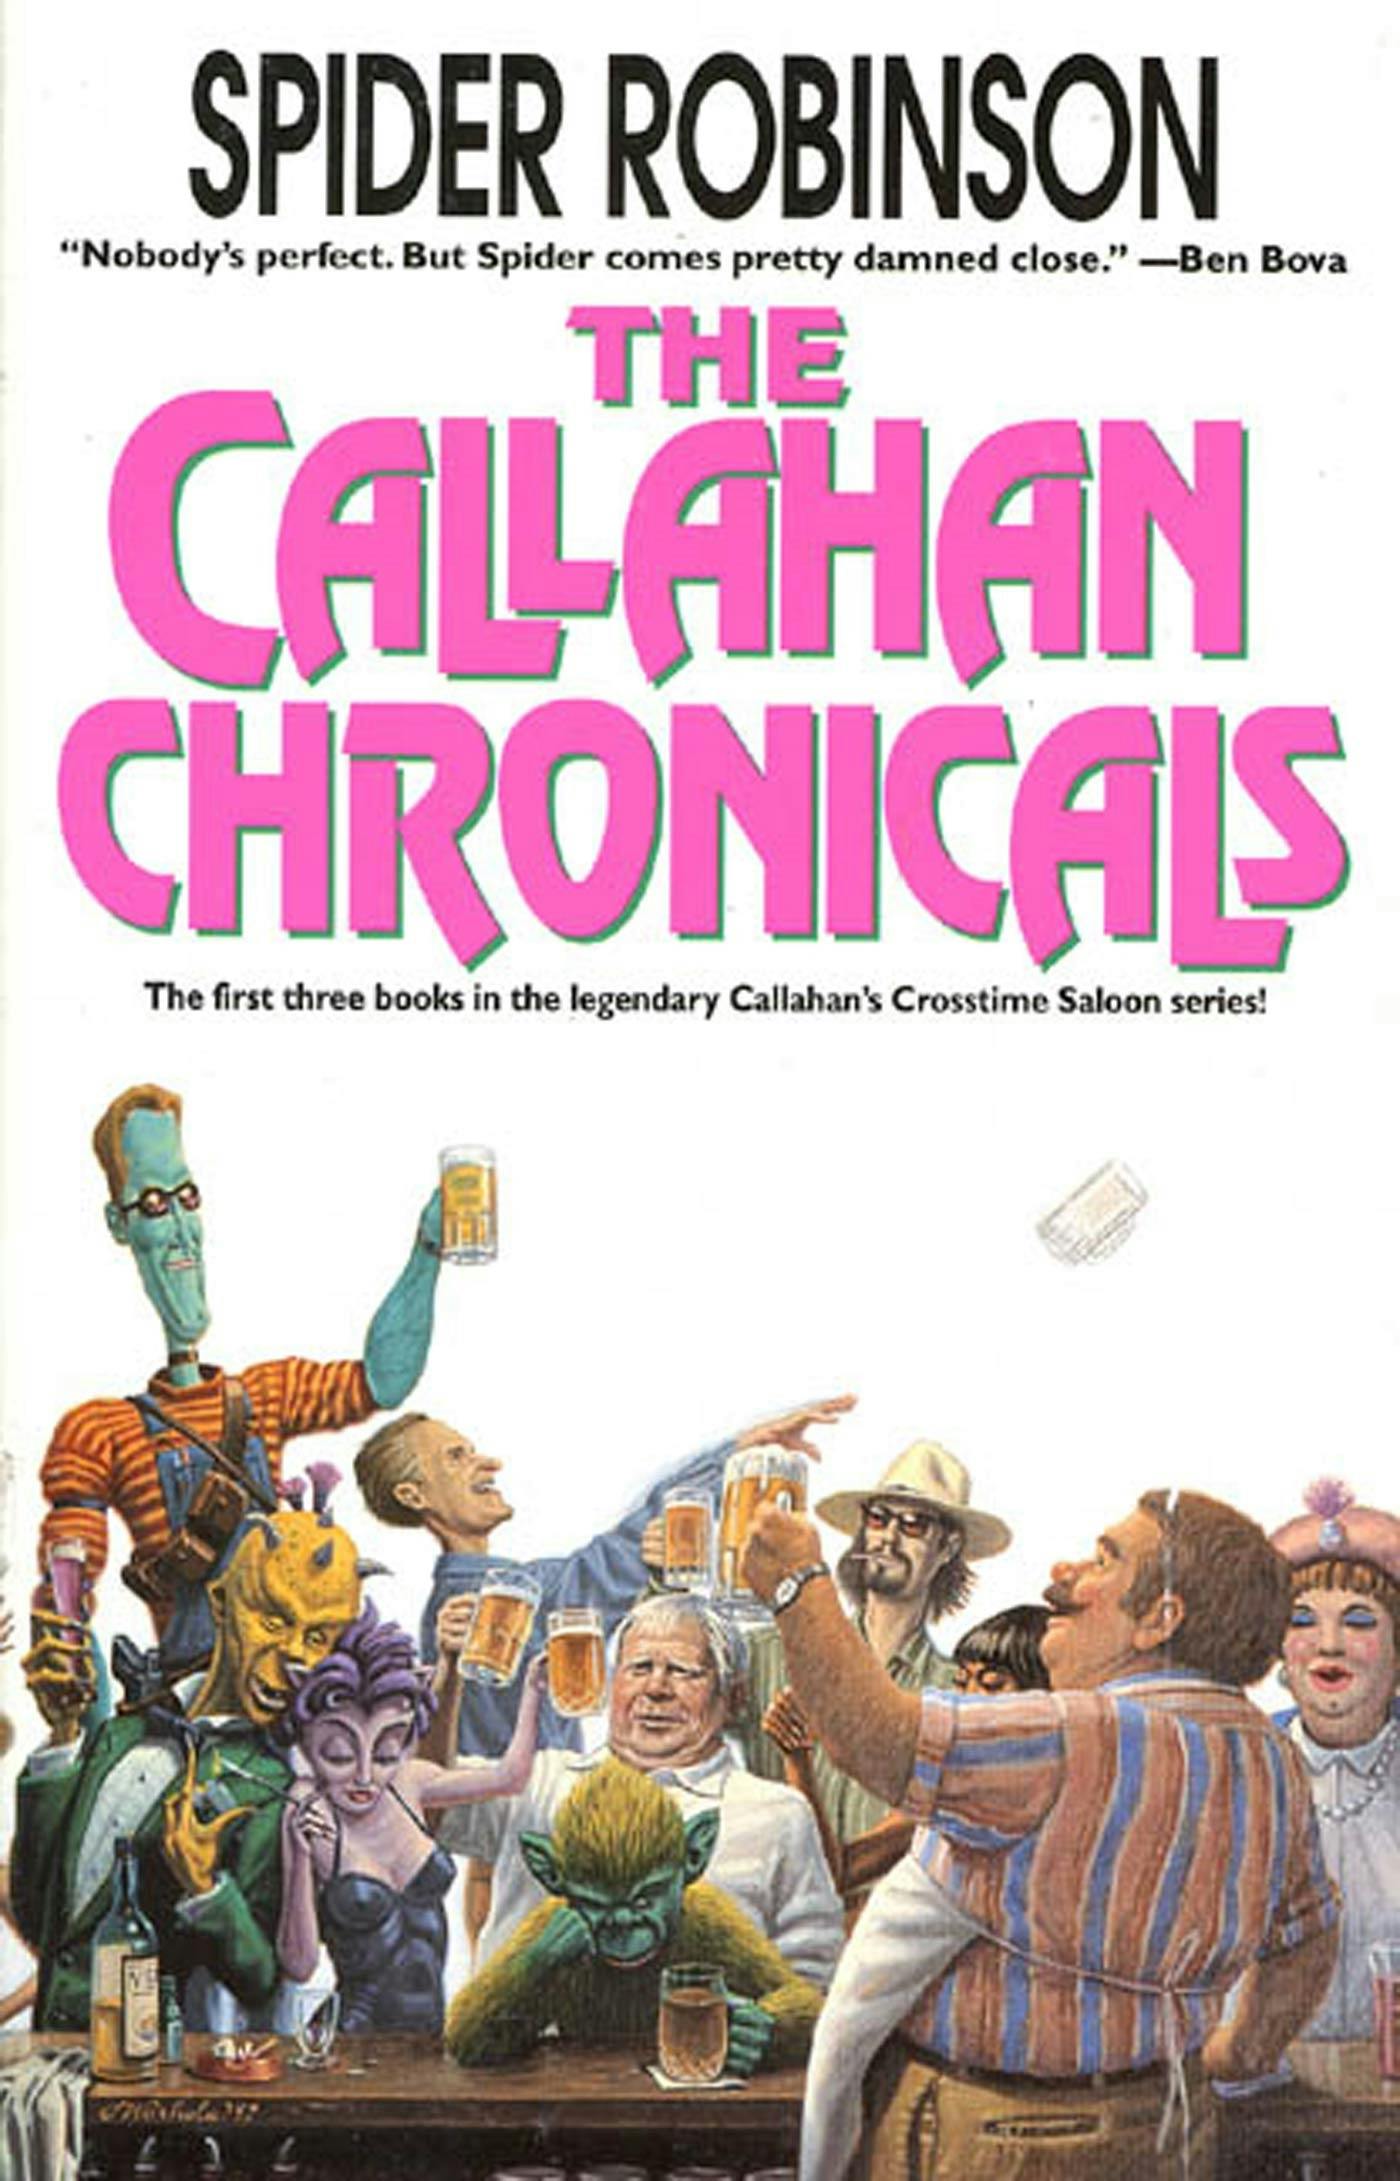 Cover for the book titled as: The Callahan Chronicals